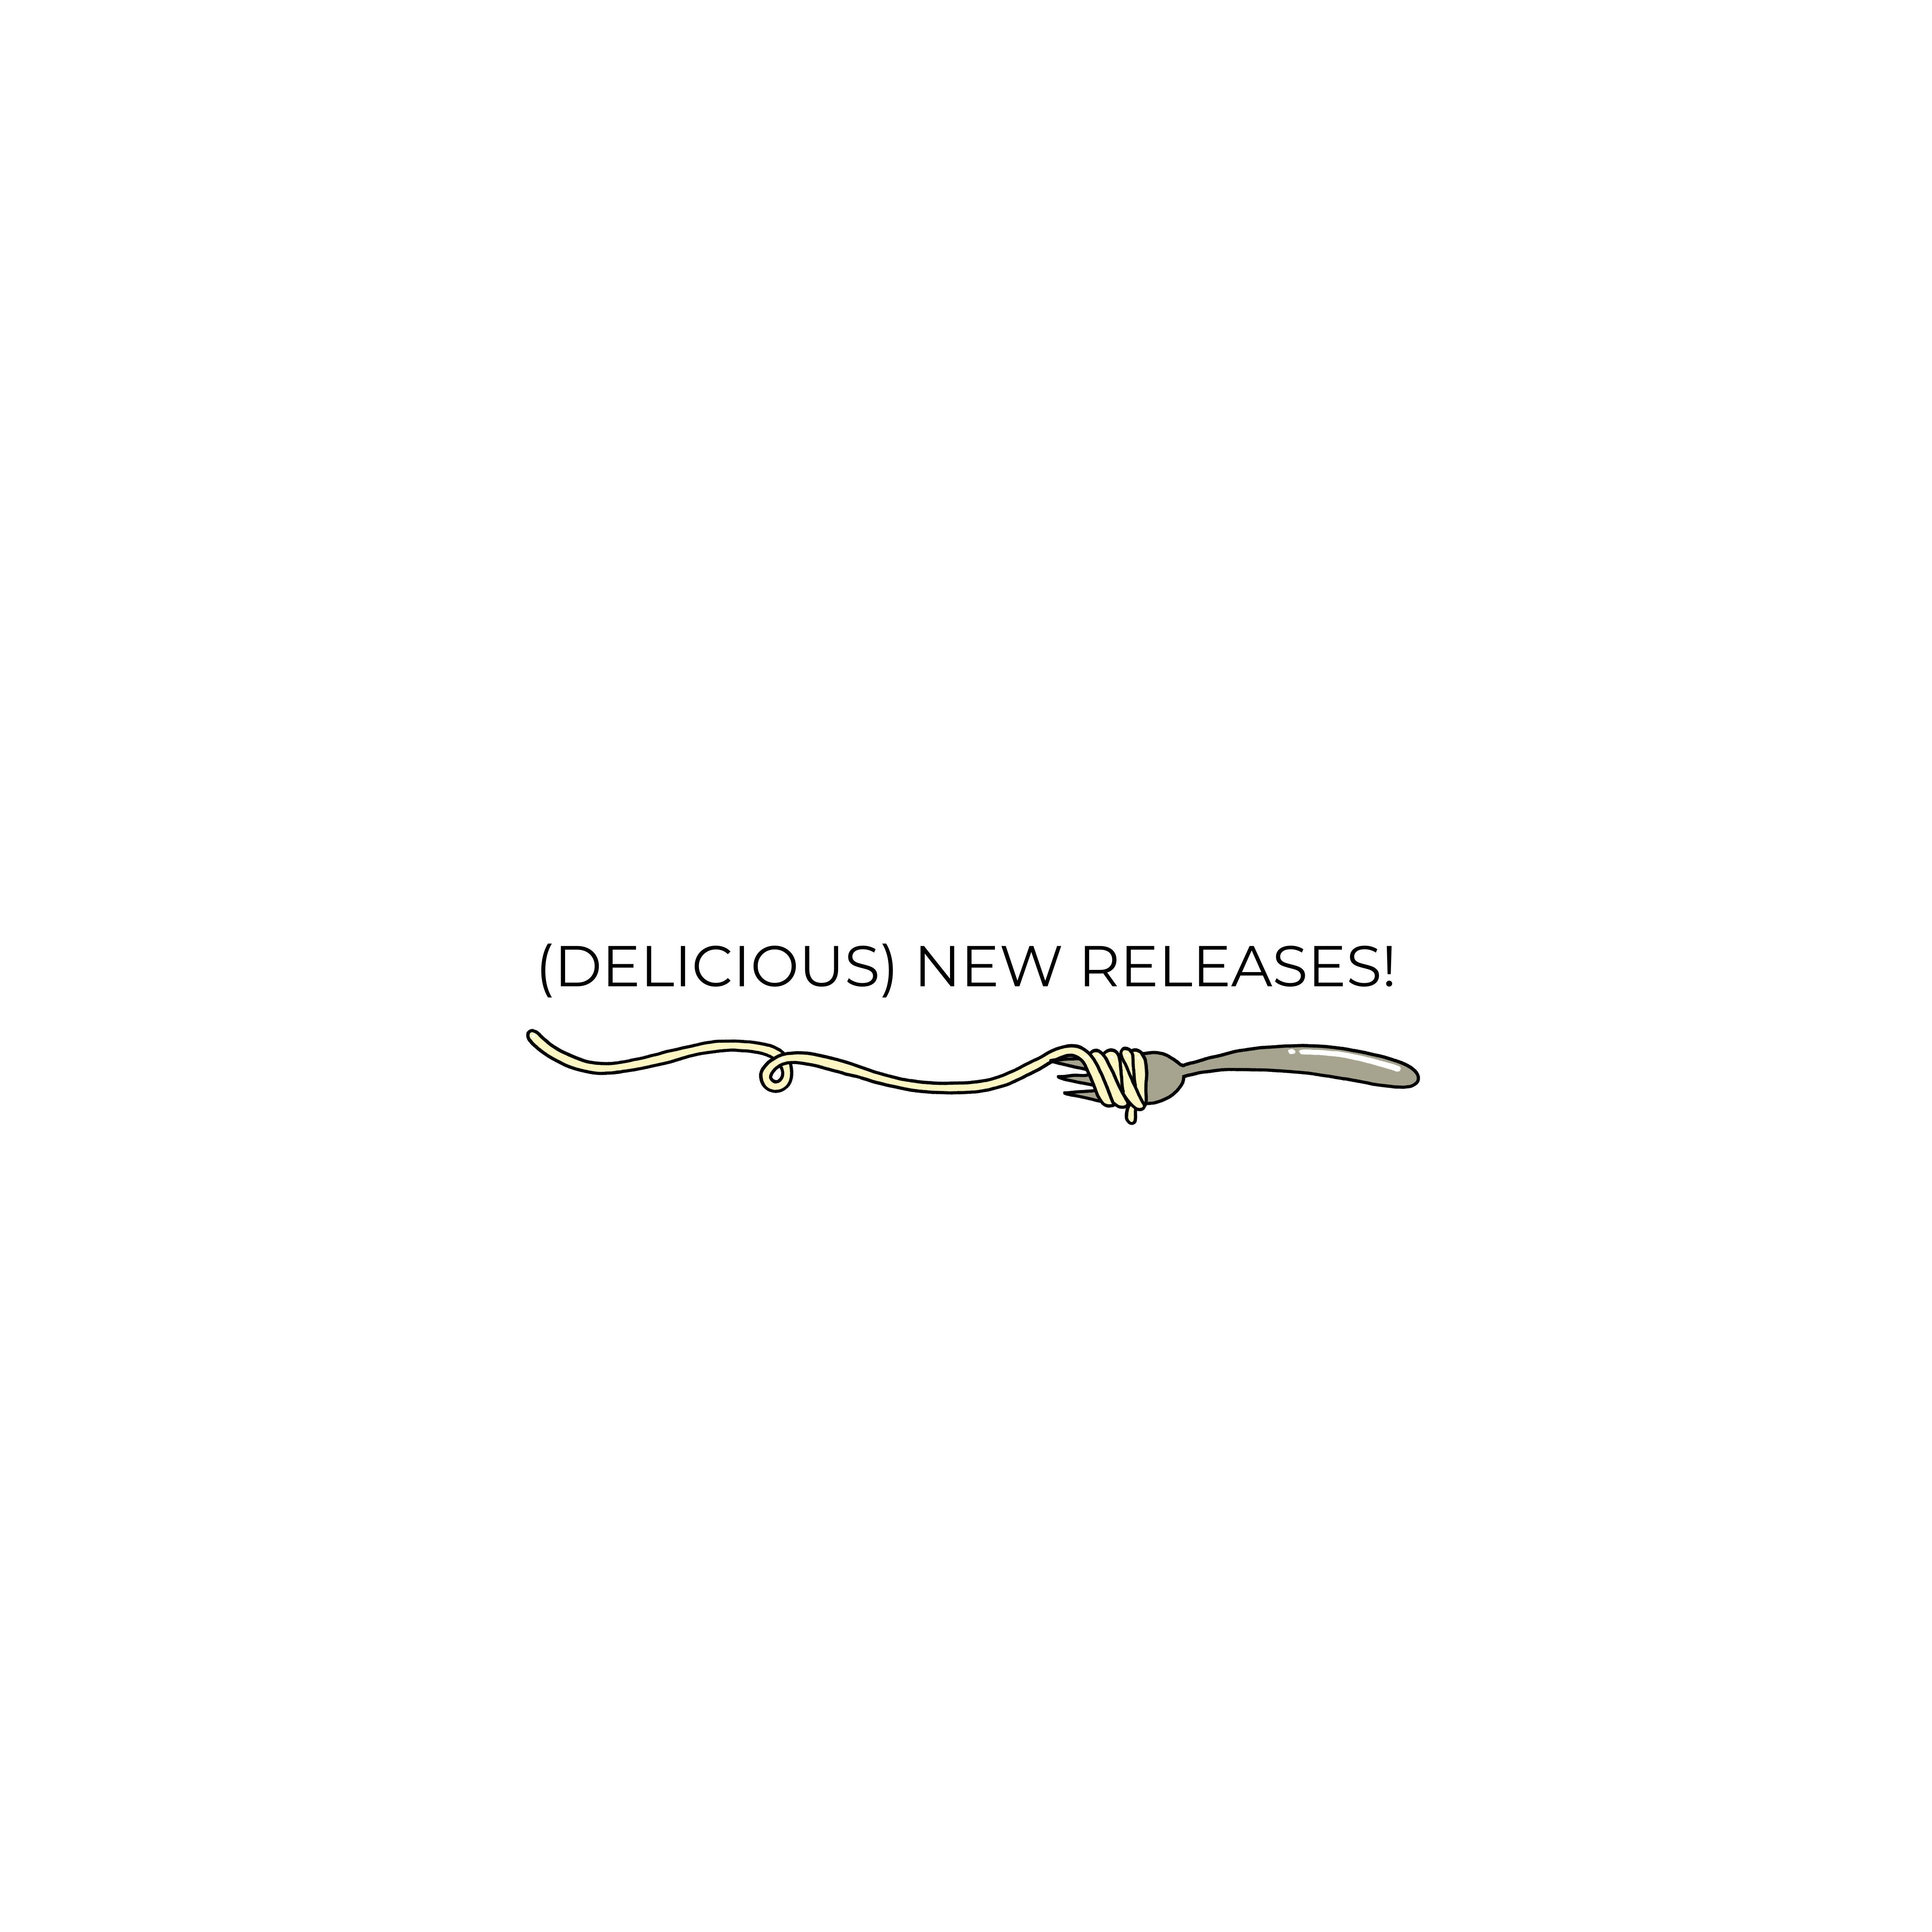 (DELICIOUS) NEW RELEASES!